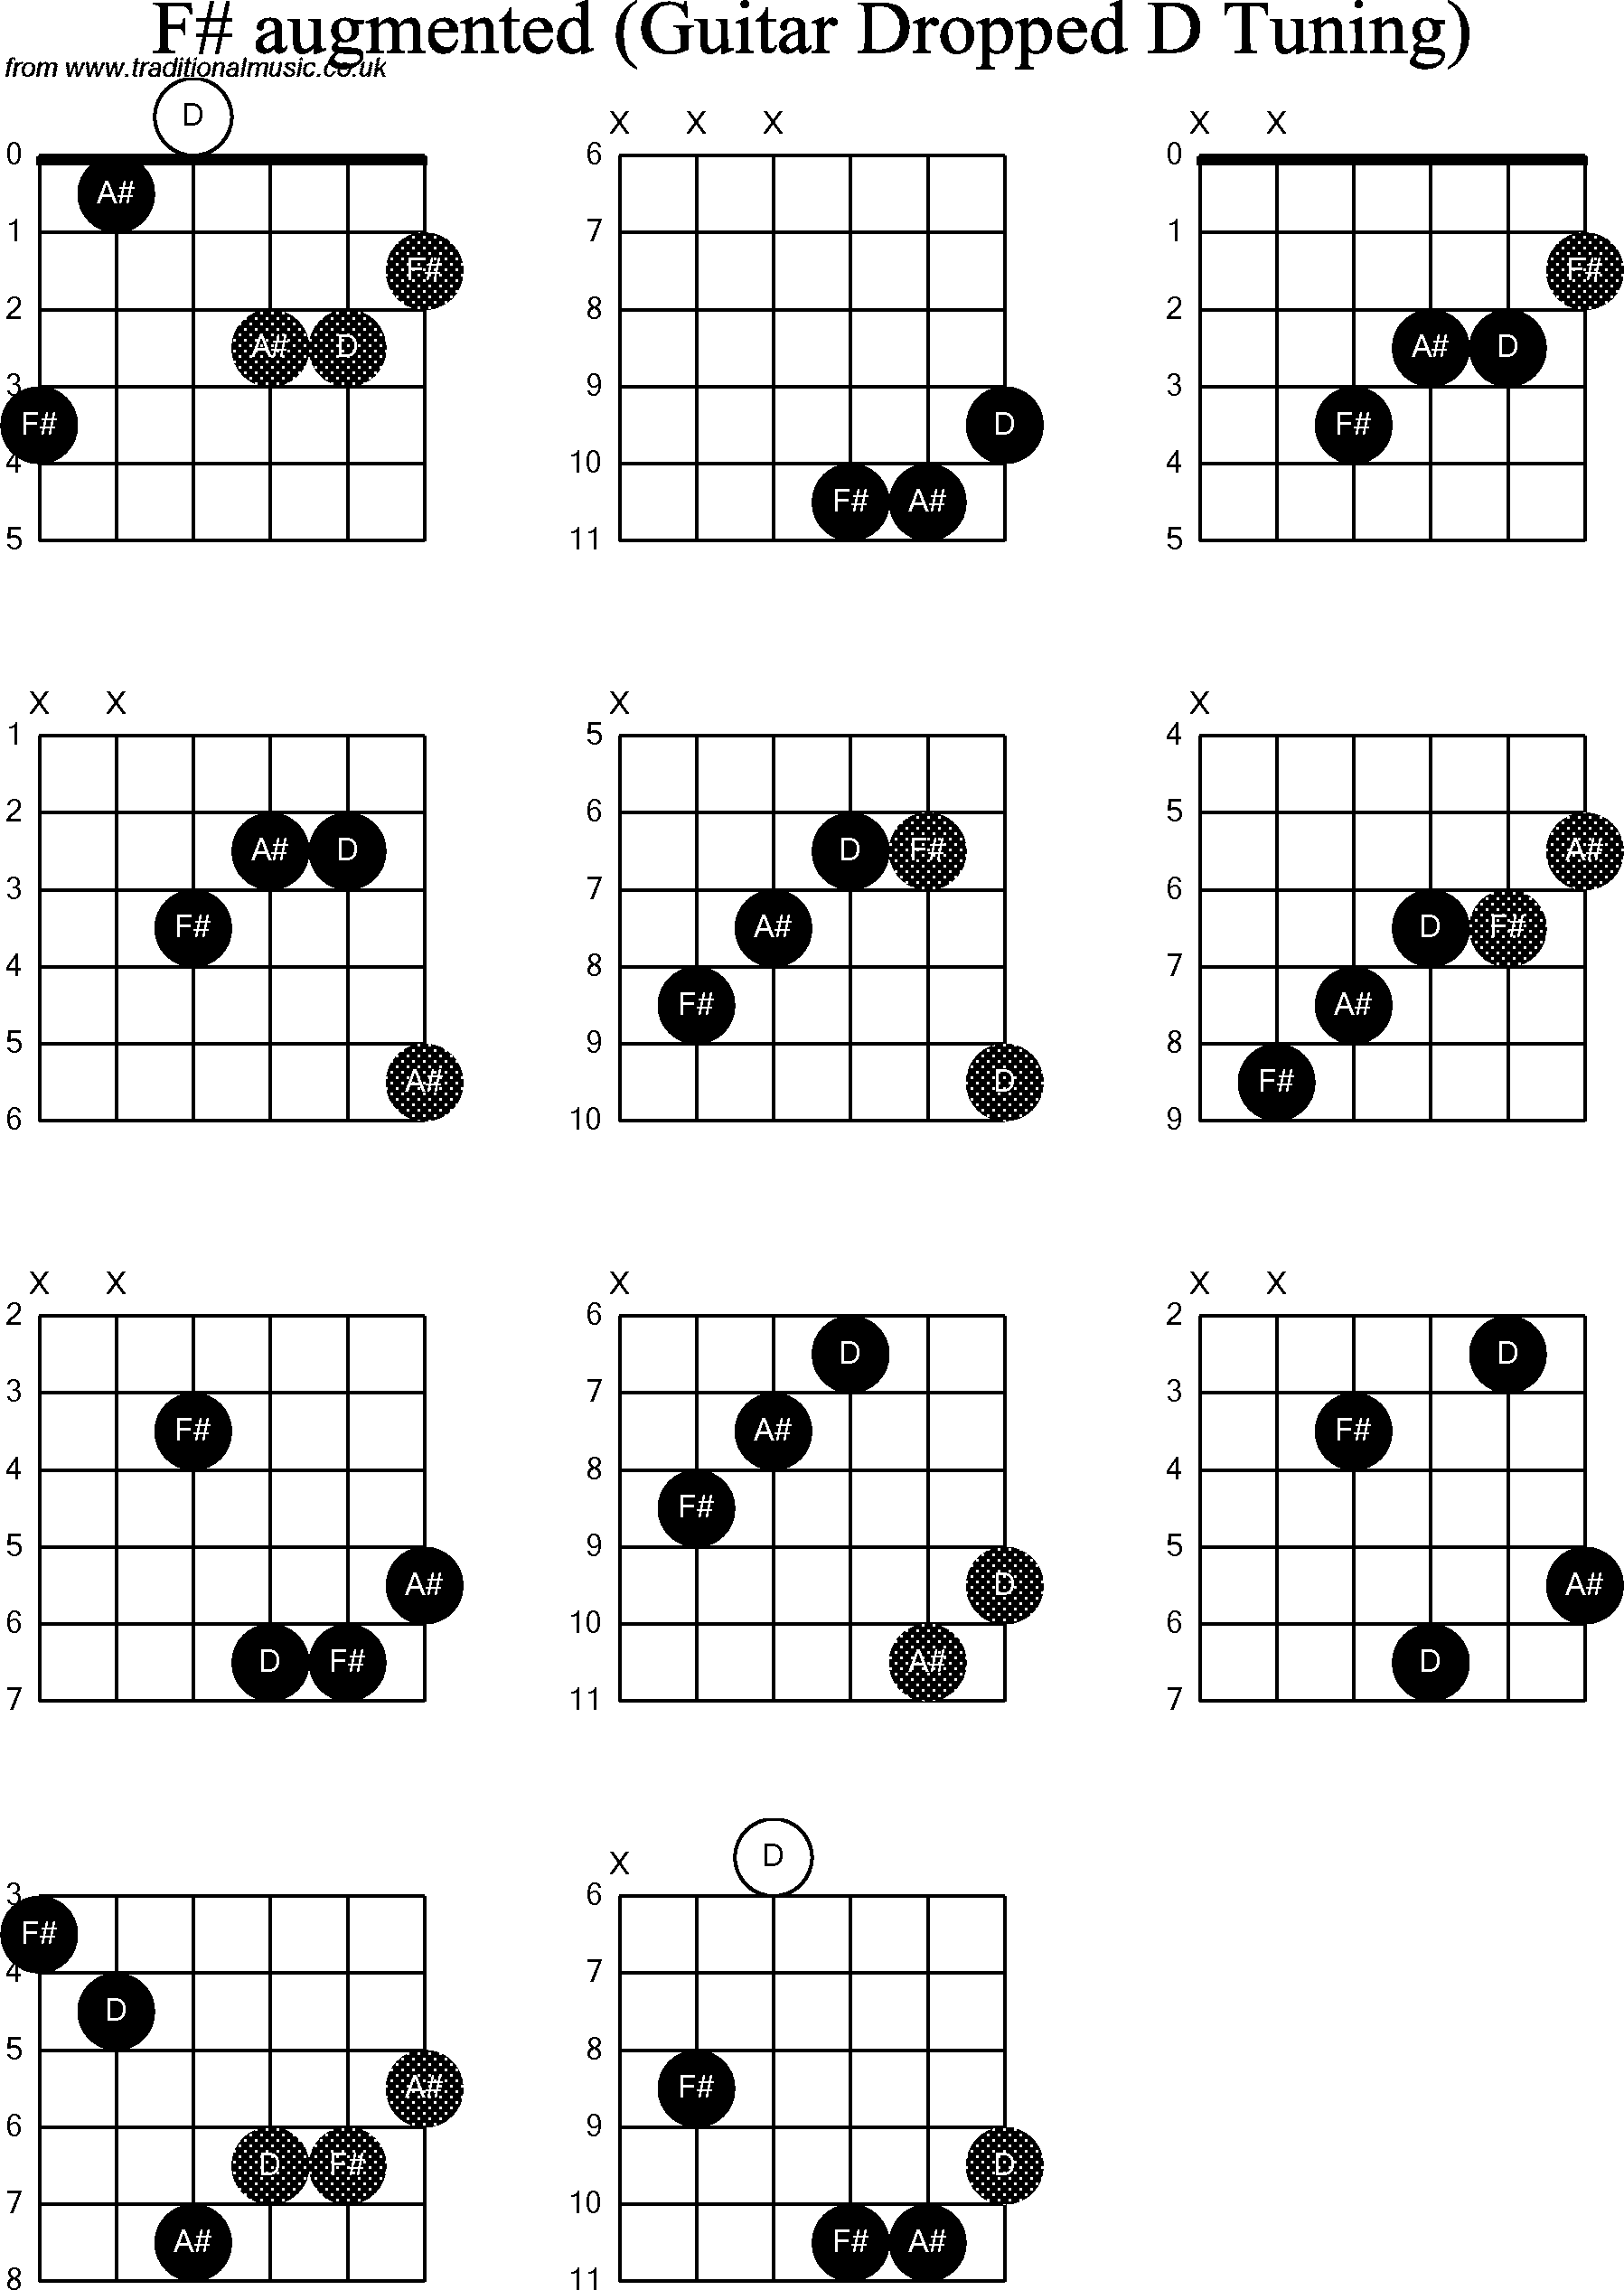 Chord diagrams for dropped D Guitar(DADGBE), F Sharp Augmented